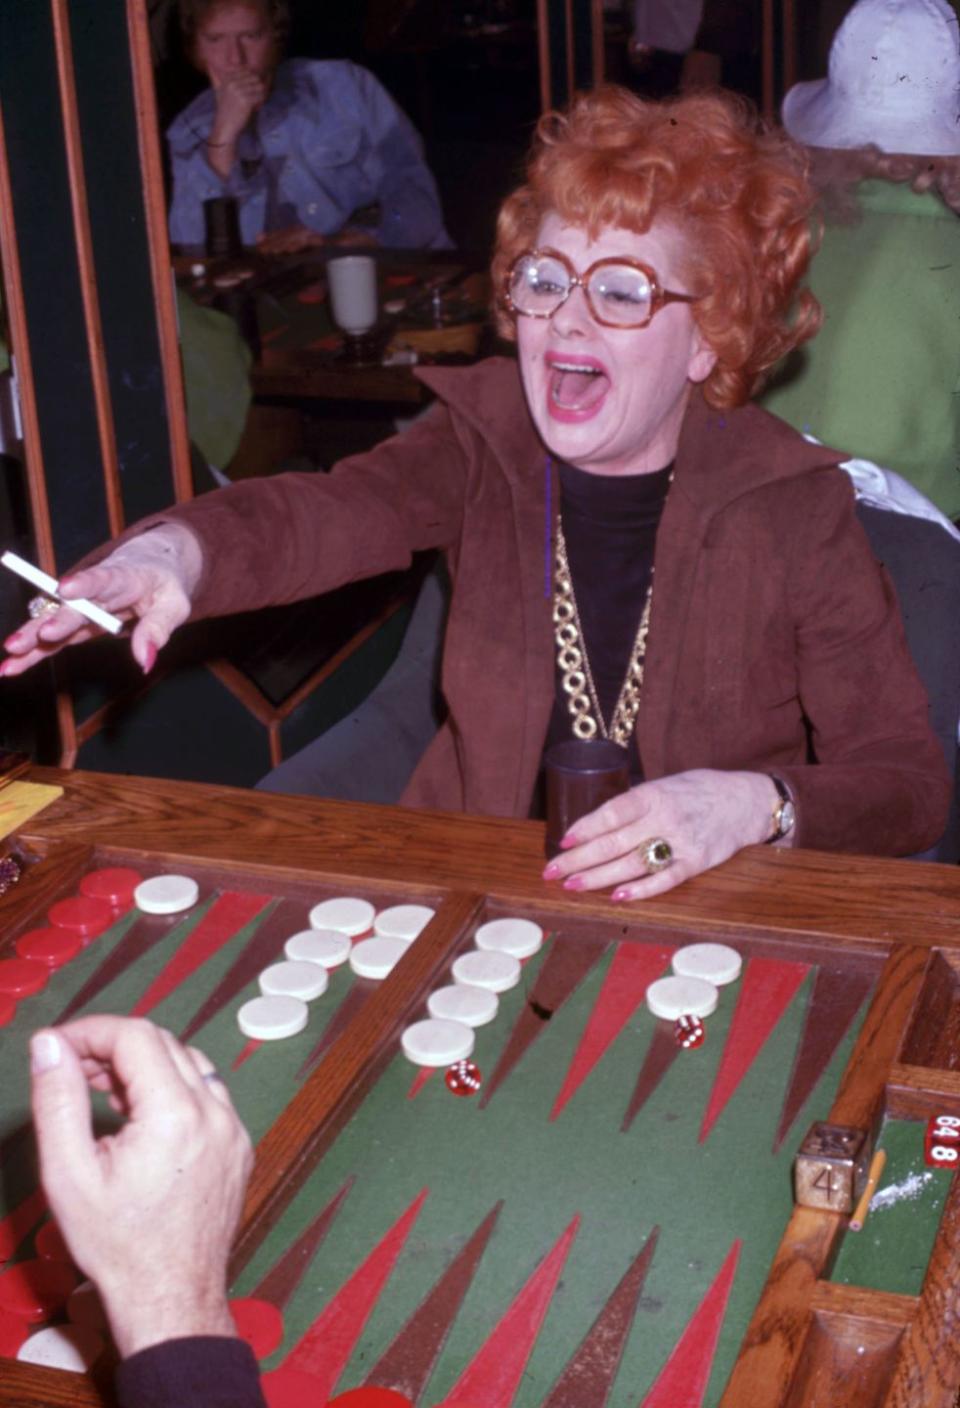 1978: Playing a rousing game of backgammon